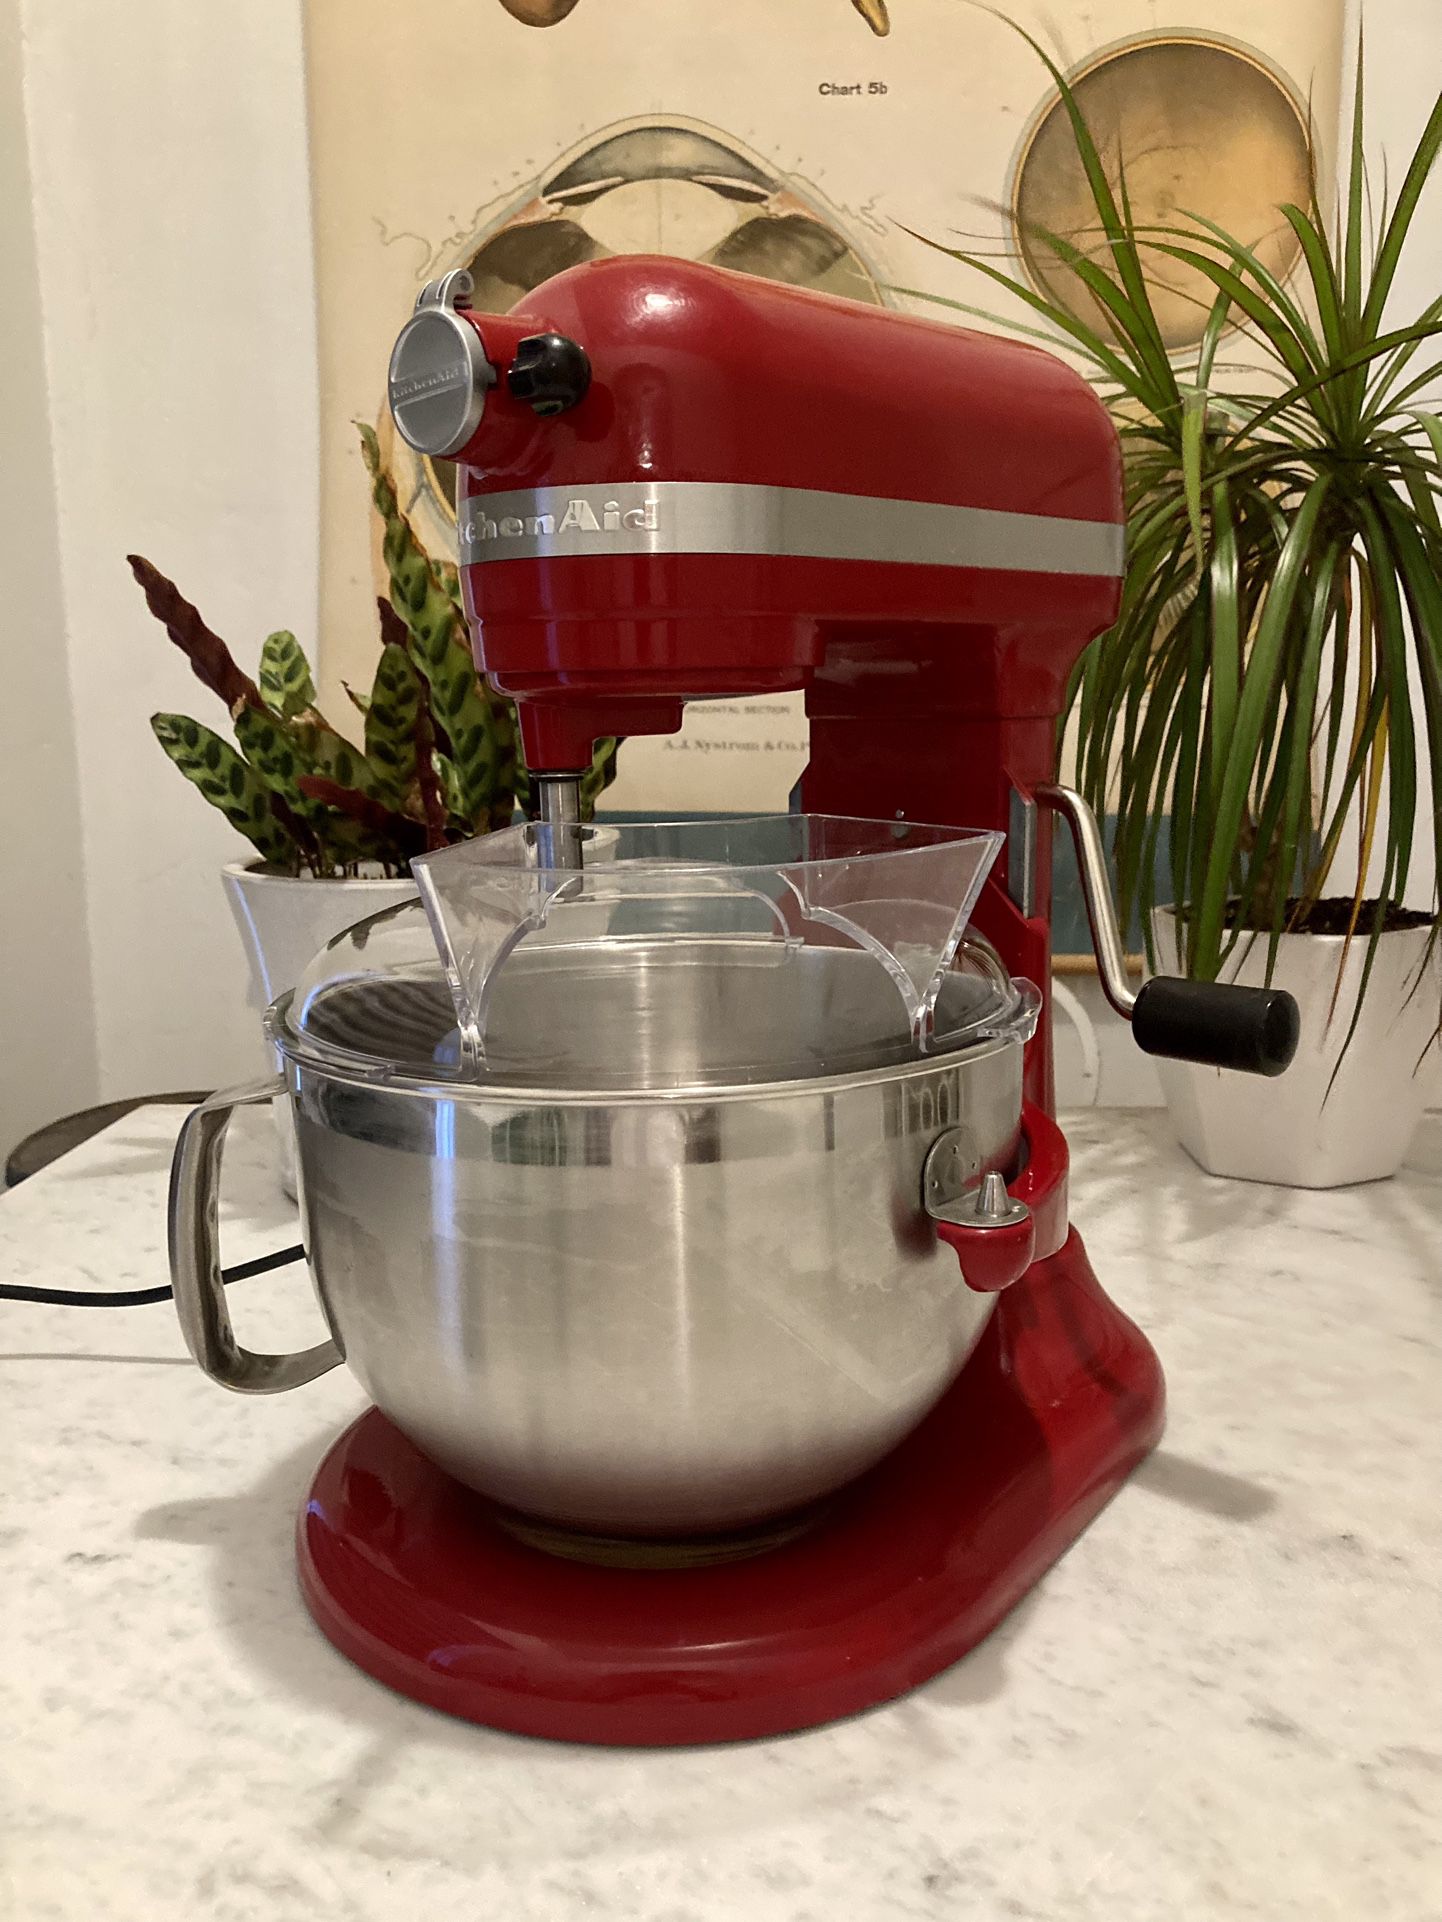 Kitchenaid Professional 600 Series 6 Quart Bowl-lift Stand Mixer for Sale  in Seattle, WA - OfferUp